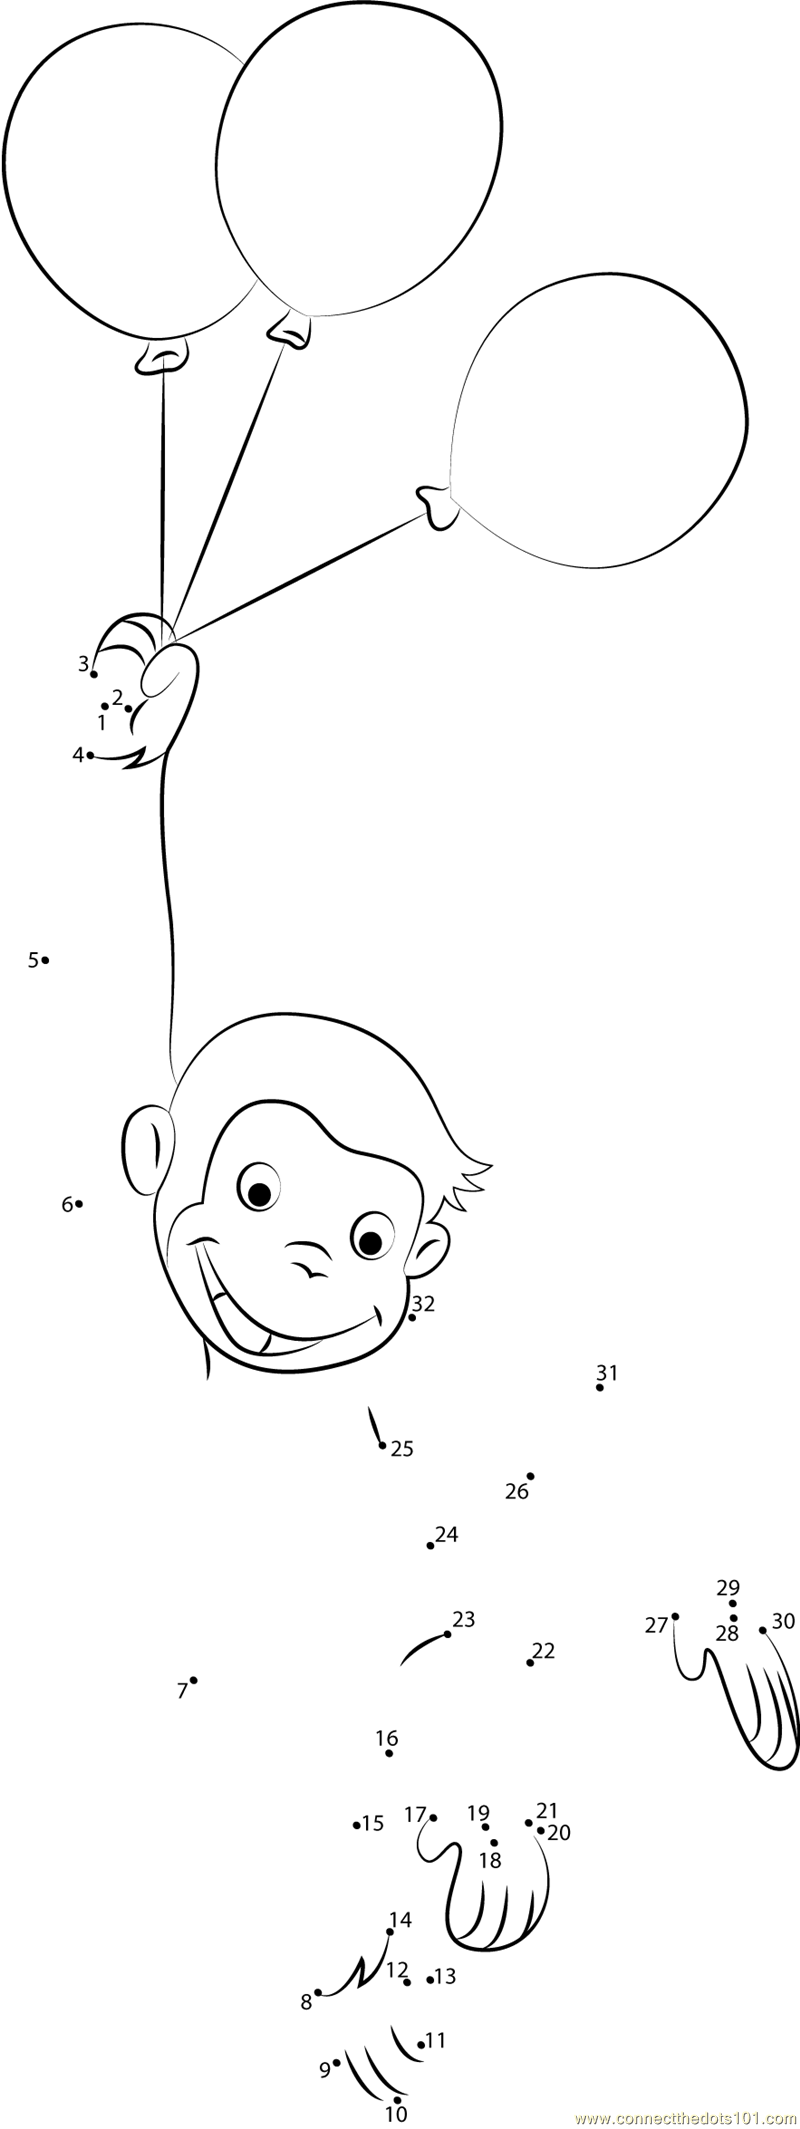 Curious George with Balloons